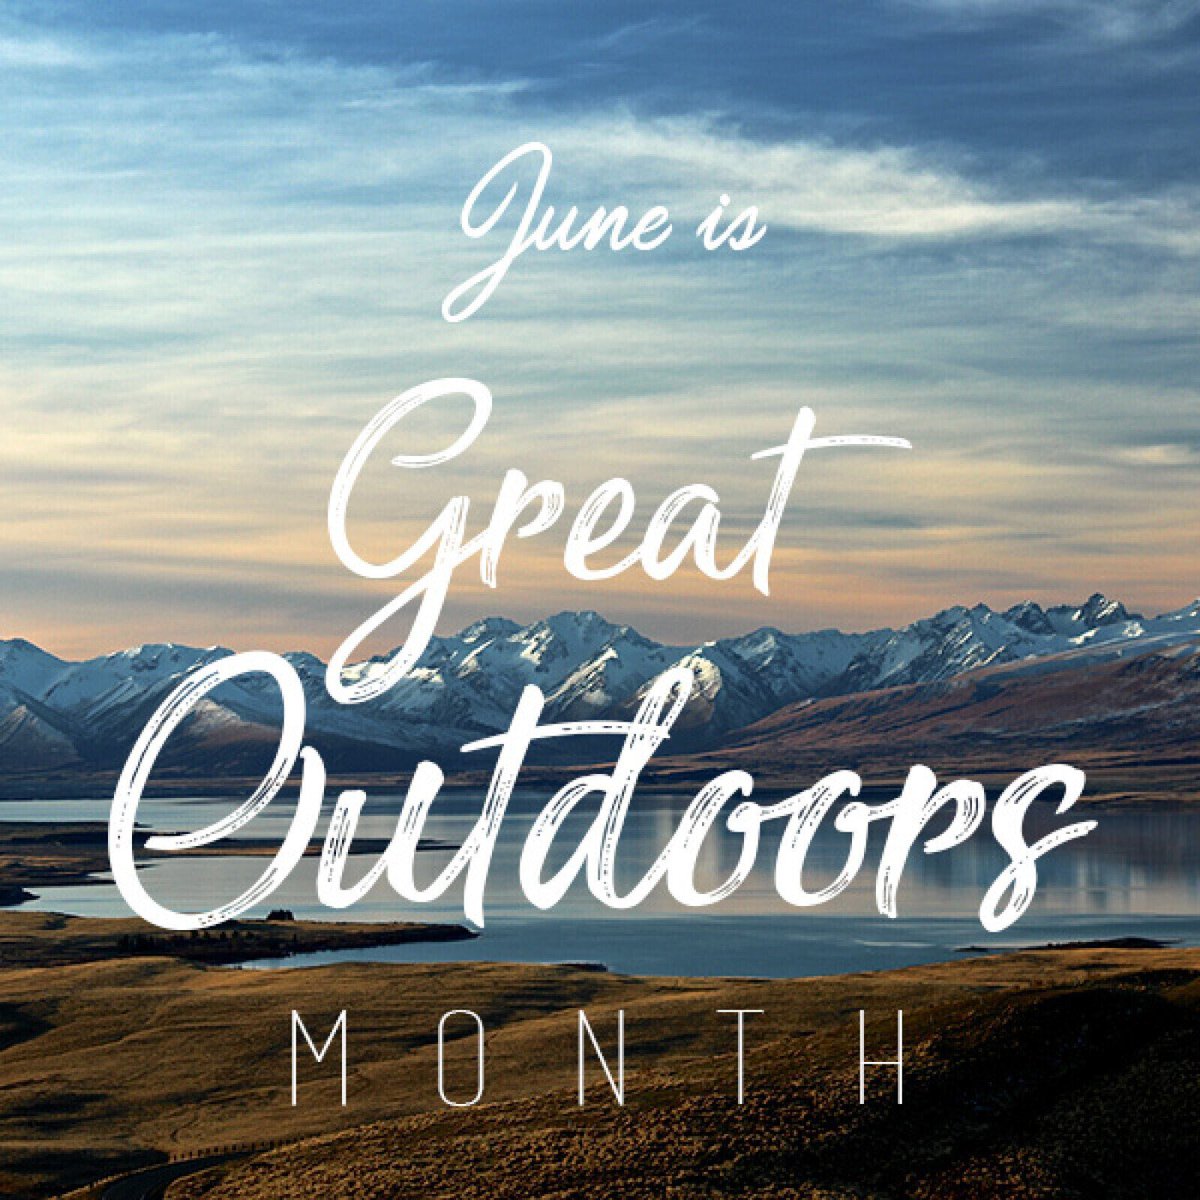 June is Great Outdoors Month. Summer is a wonderful time to get outside and explore, whether it's hiking, camping, biking, or going to the park. What's your favorite way to explore the outdoors? 
#greatoutdoorsmonth